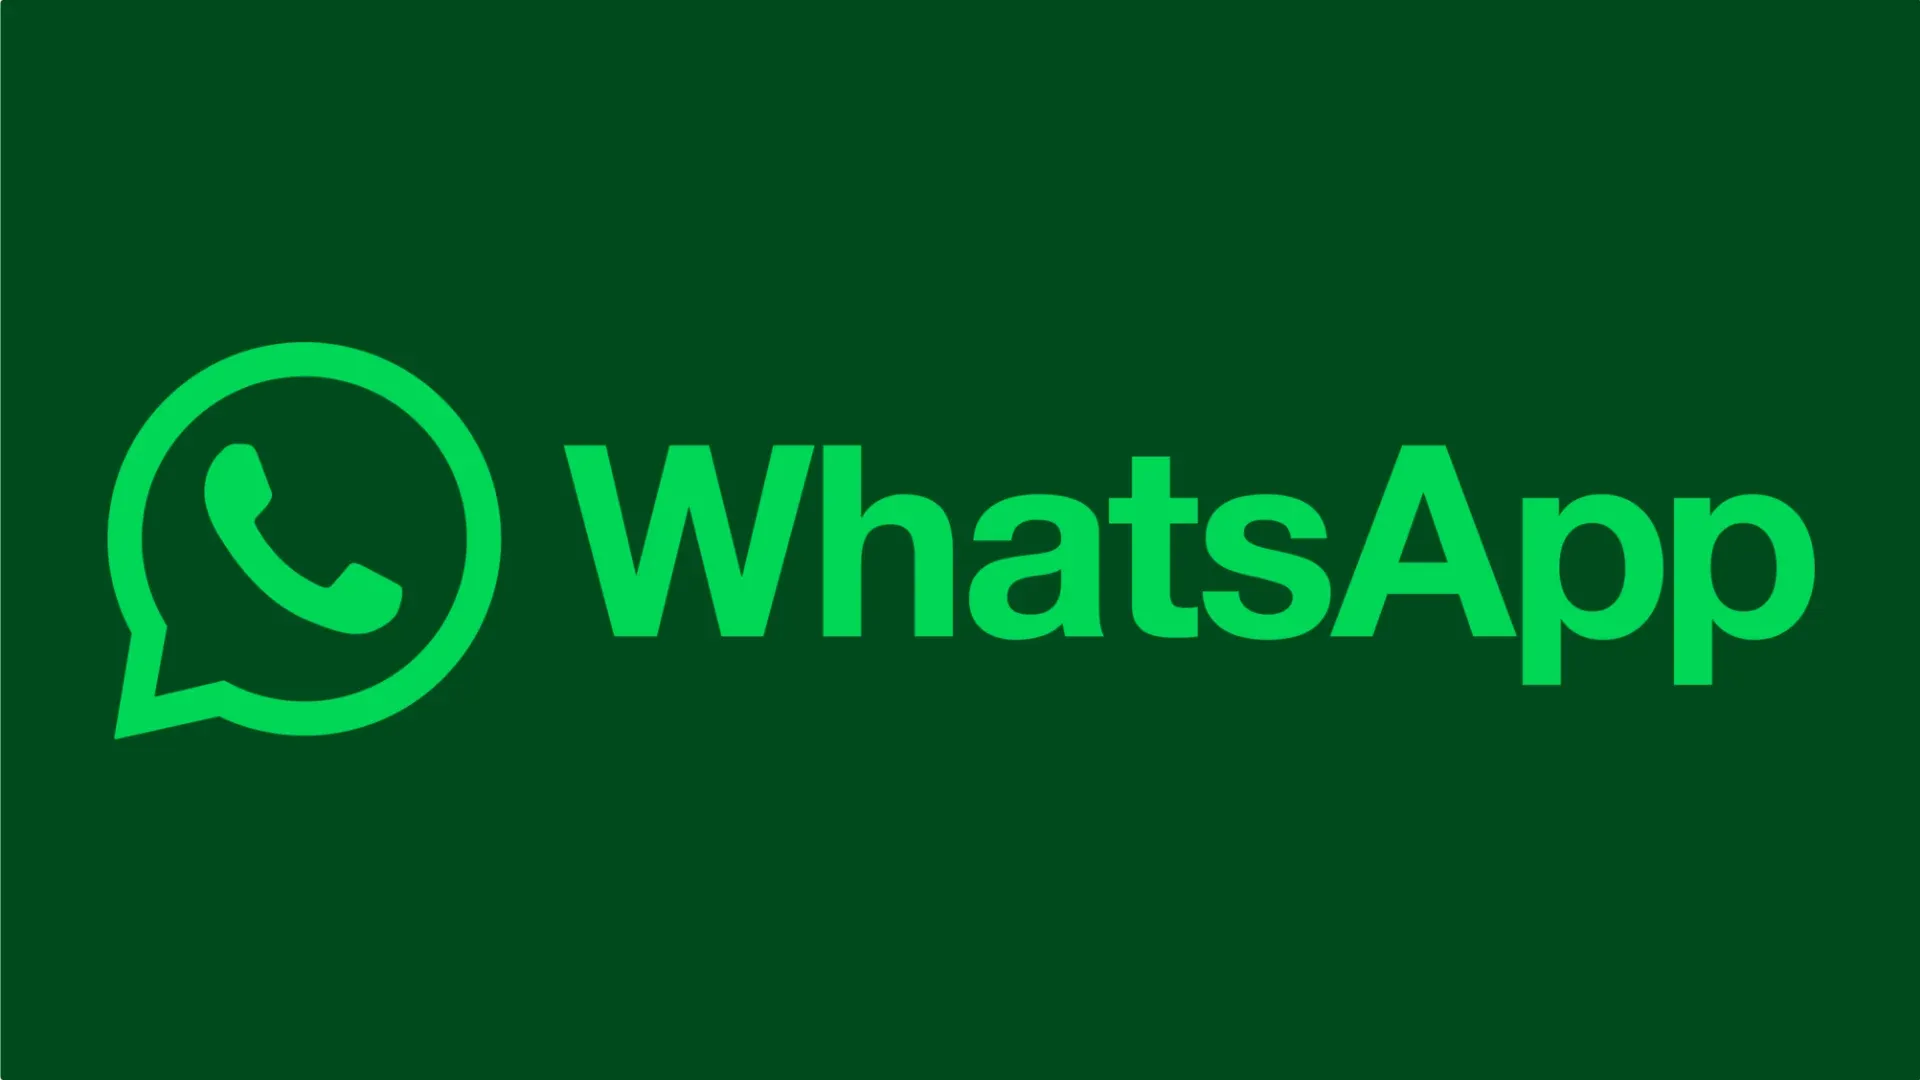 You Can Now Sign In On WhatsApp Using Email Address!